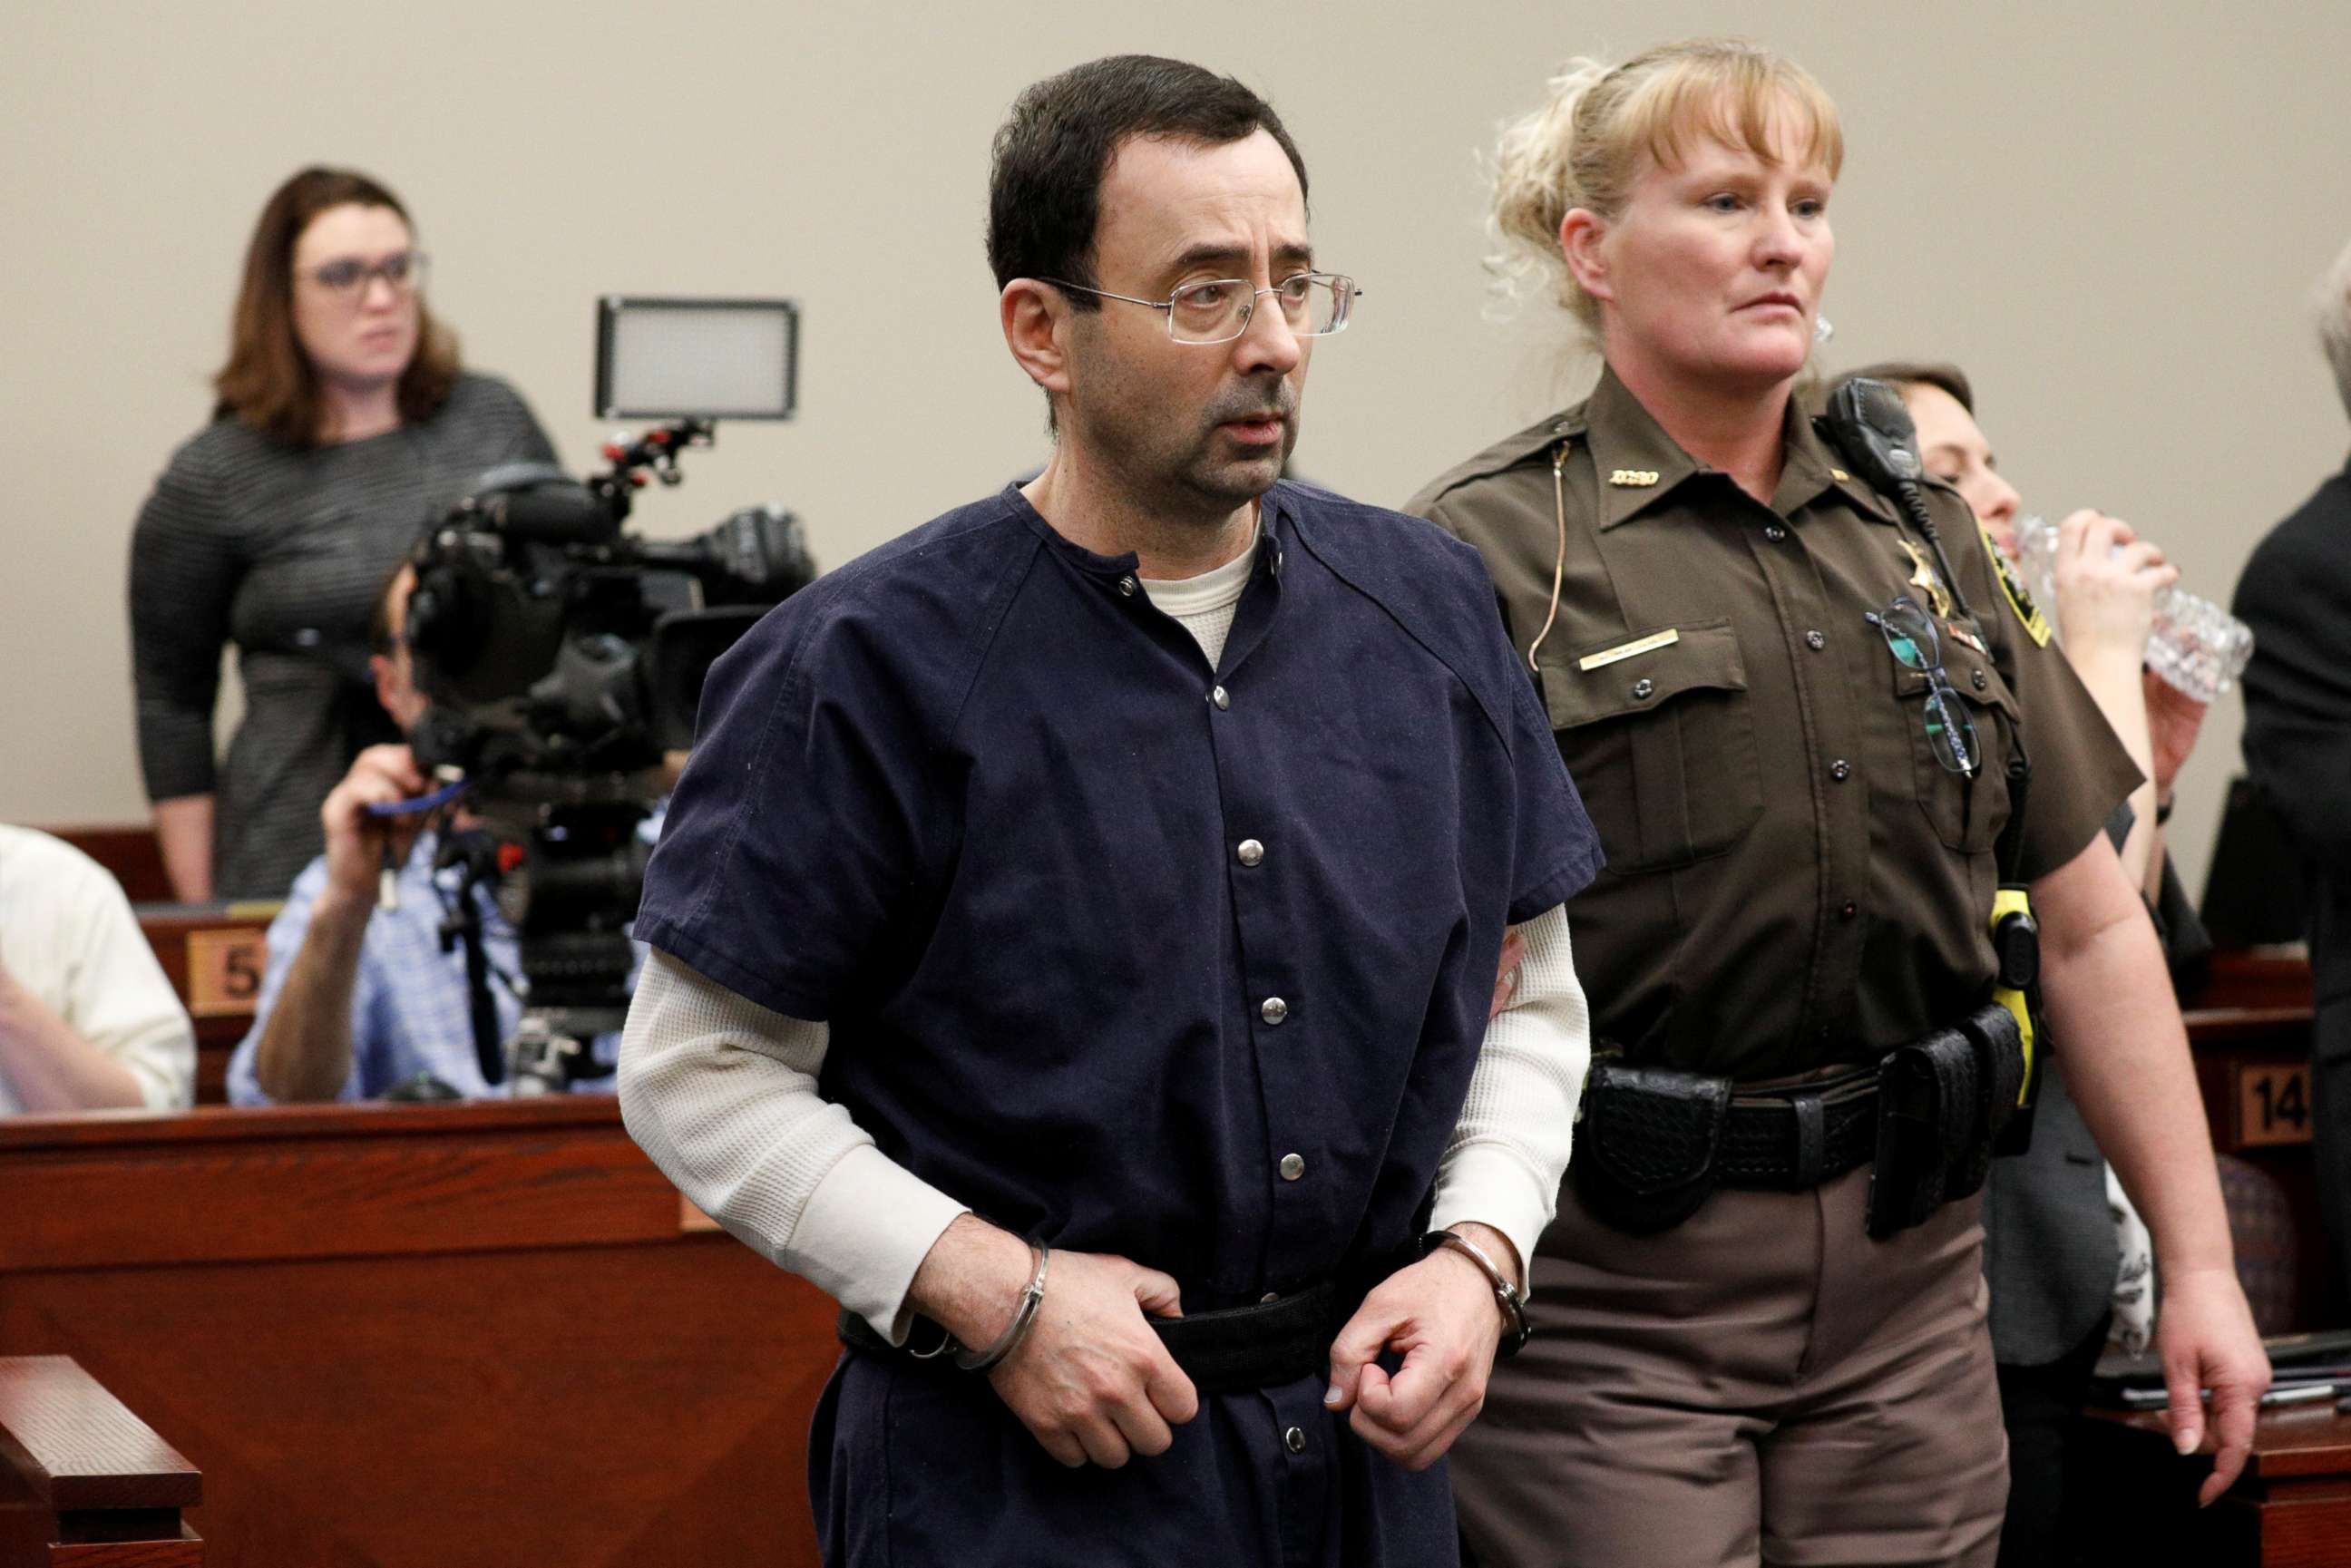 PHOTO: Larry Nassar, a former team USA Gymnastics doctor, who pleaded guilty in Nov. 2017 to sexual assault charges, is led from the courtroom after listening to victim testimony during his sentencing hearing in Lansing, Mich., Jan. 23, 2018. 